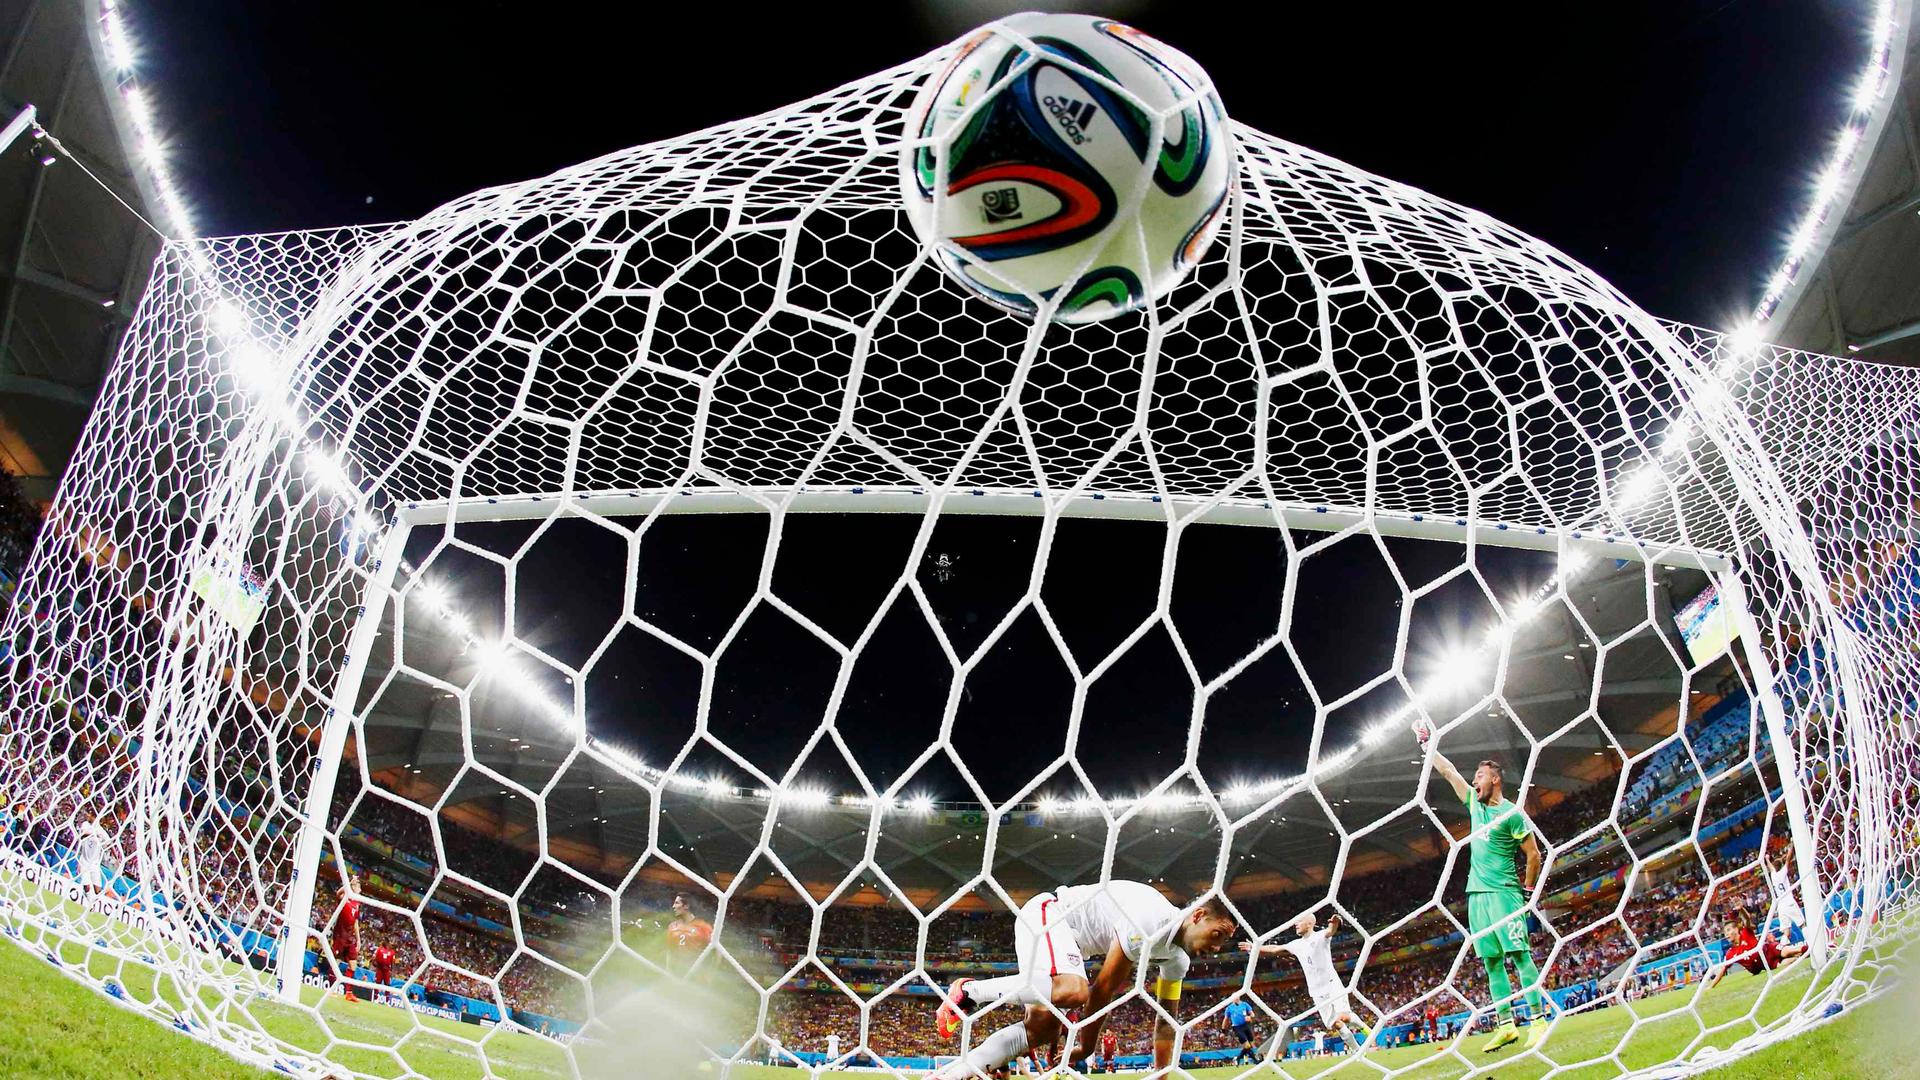 Clint Dempsey (C) of the U.S. knocks the ball into the net to score against Portugal during their 2014 World Cup Group G soccer match at the Amazonia arena in Manaus